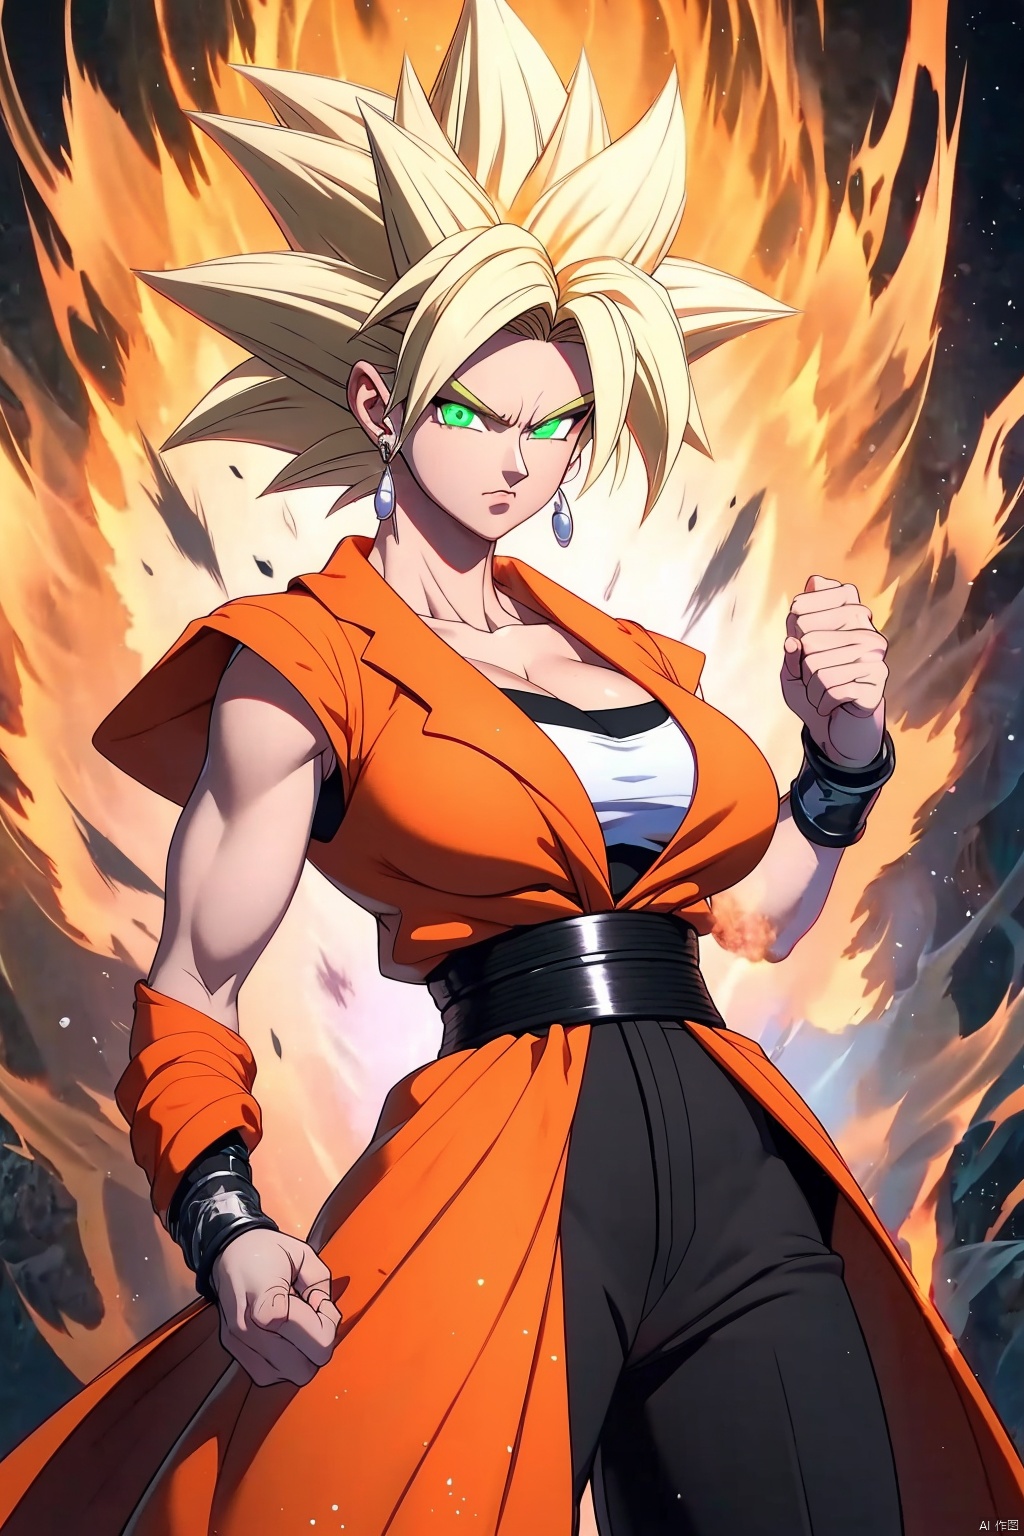  ((best quality)), masterpiece, ((ultra-detailed)), illustration, 8k wallpaper, ((extremely detailed CG unity 8k wallpaper)), (extremely detailed eyes and face), huge filesize, game cg,

blonde hair, super saiyan, spiked hair,glowing, aura, serious, clenched hands, glowing eyes,small sized breasts,The green eyes,cleavage,

Black long-sleeved top, orange sleeveless jacket,black pants,white belt,pearl earrings,

looking at viewer, female focus, 1girl, solo,

Ki Charge,songoku,